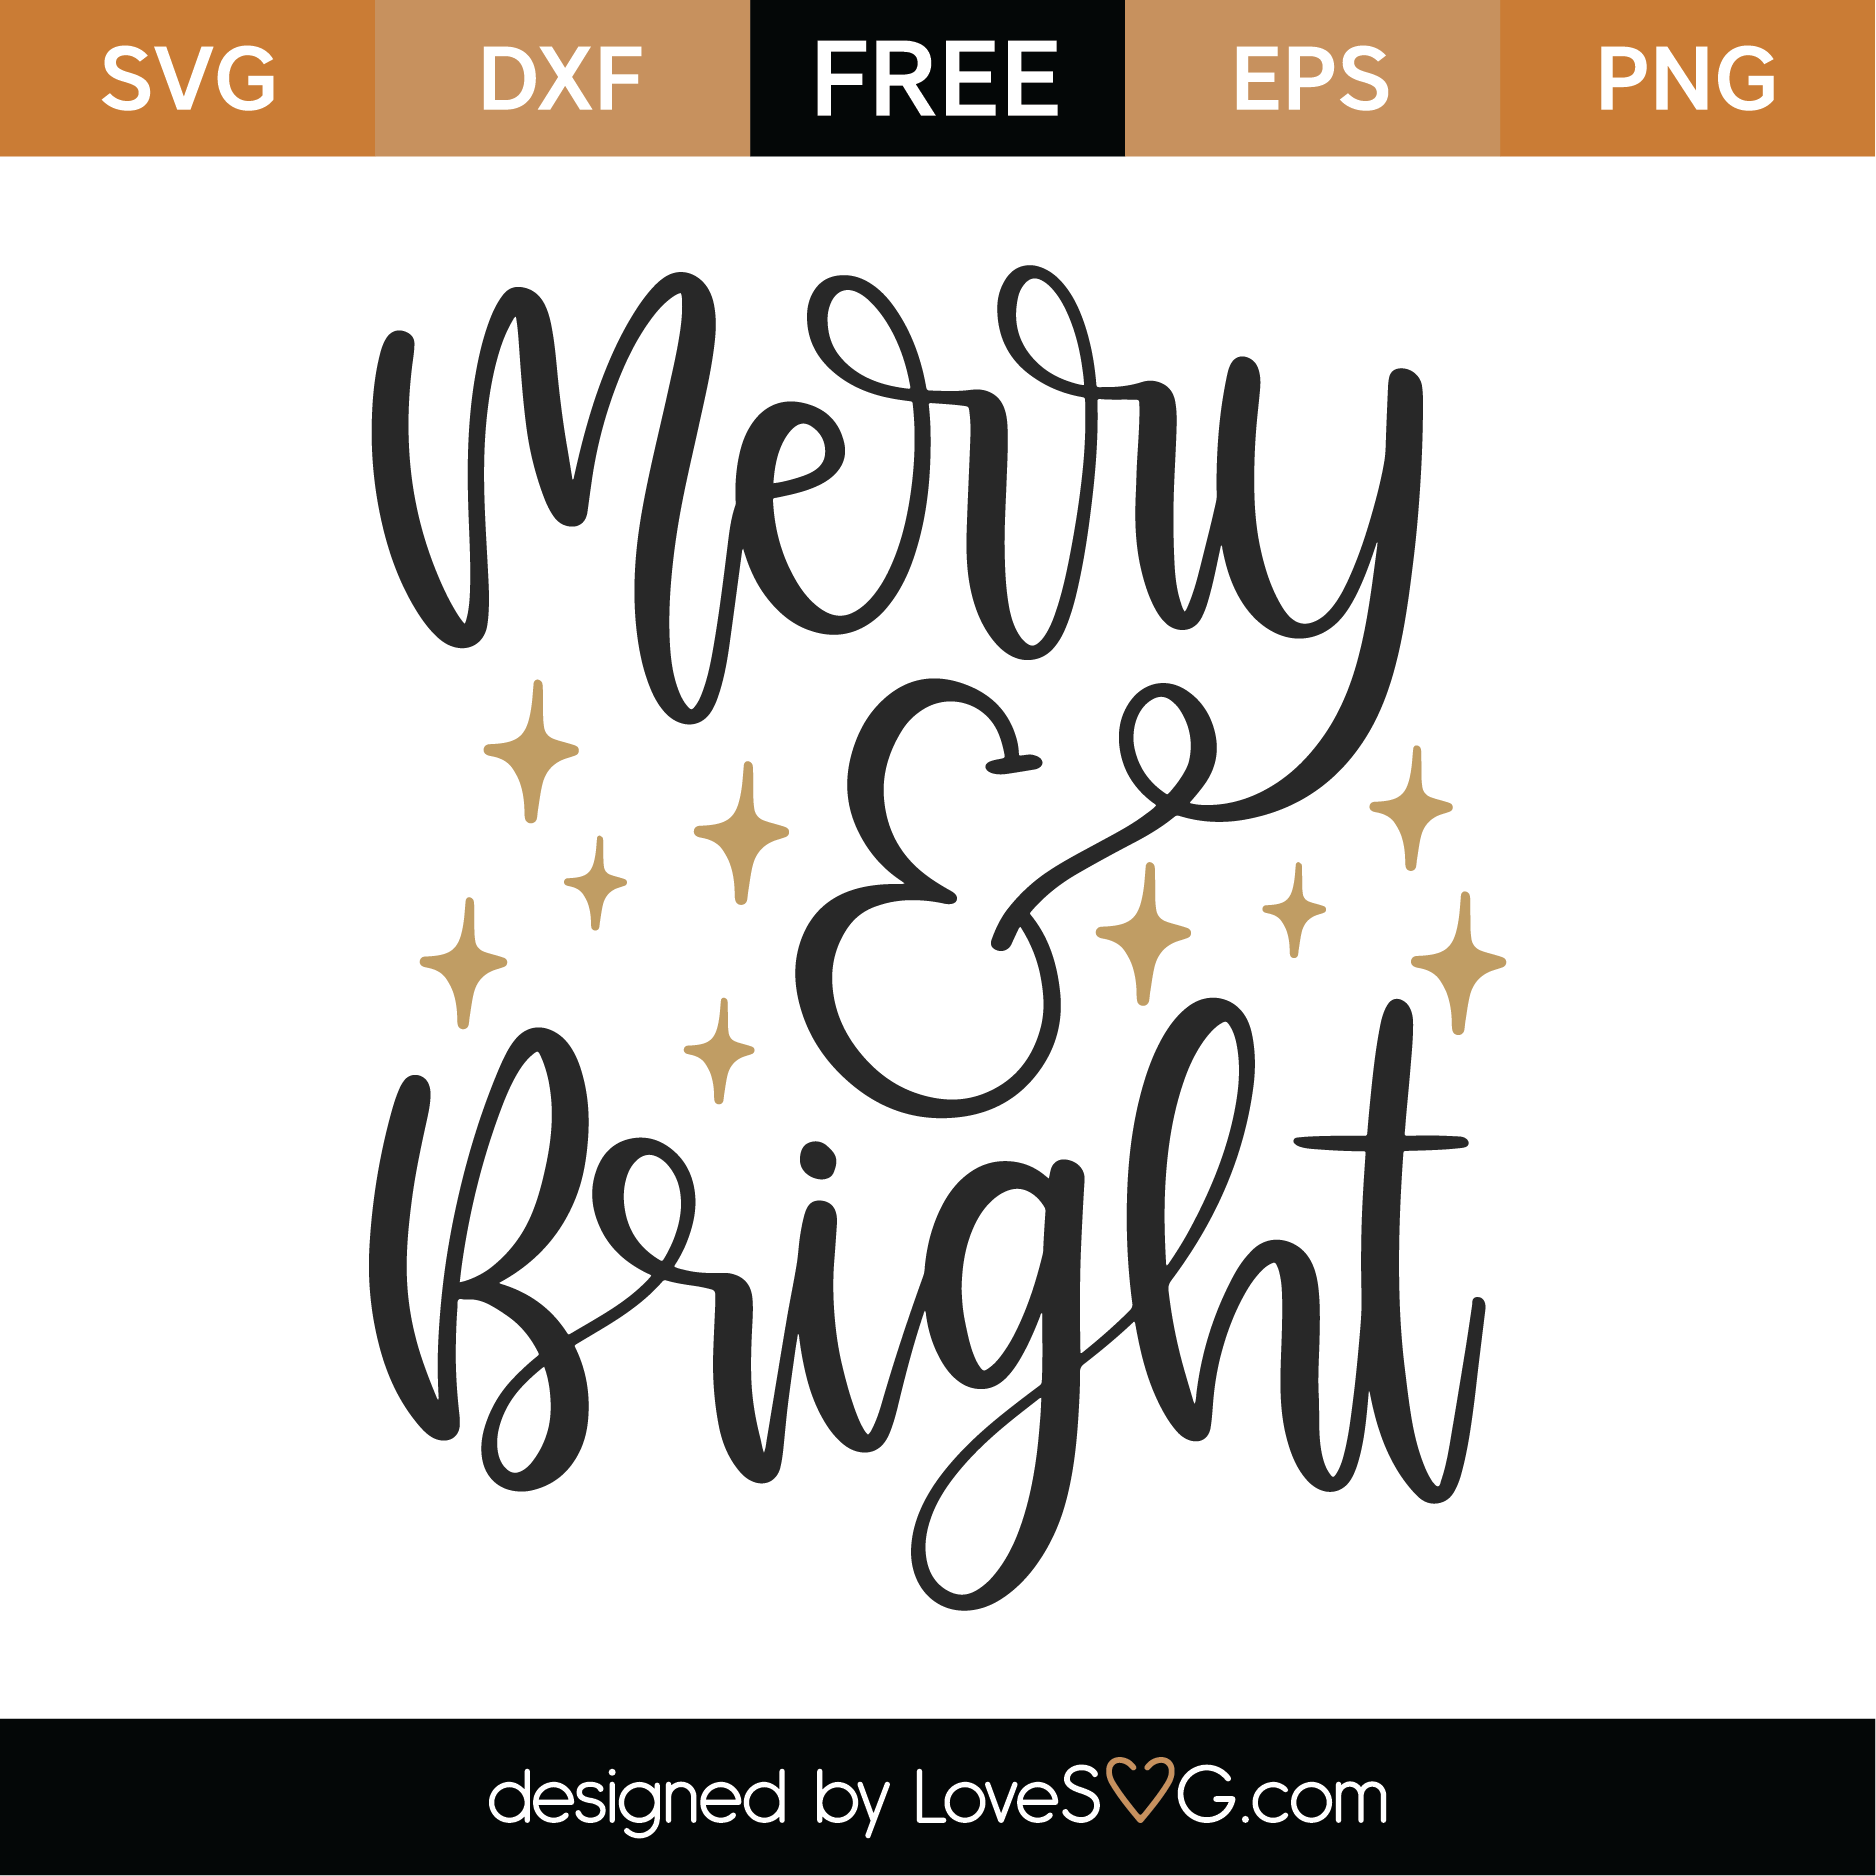 Download Free Merry and Bright SVG Cut File | Lovesvg.com